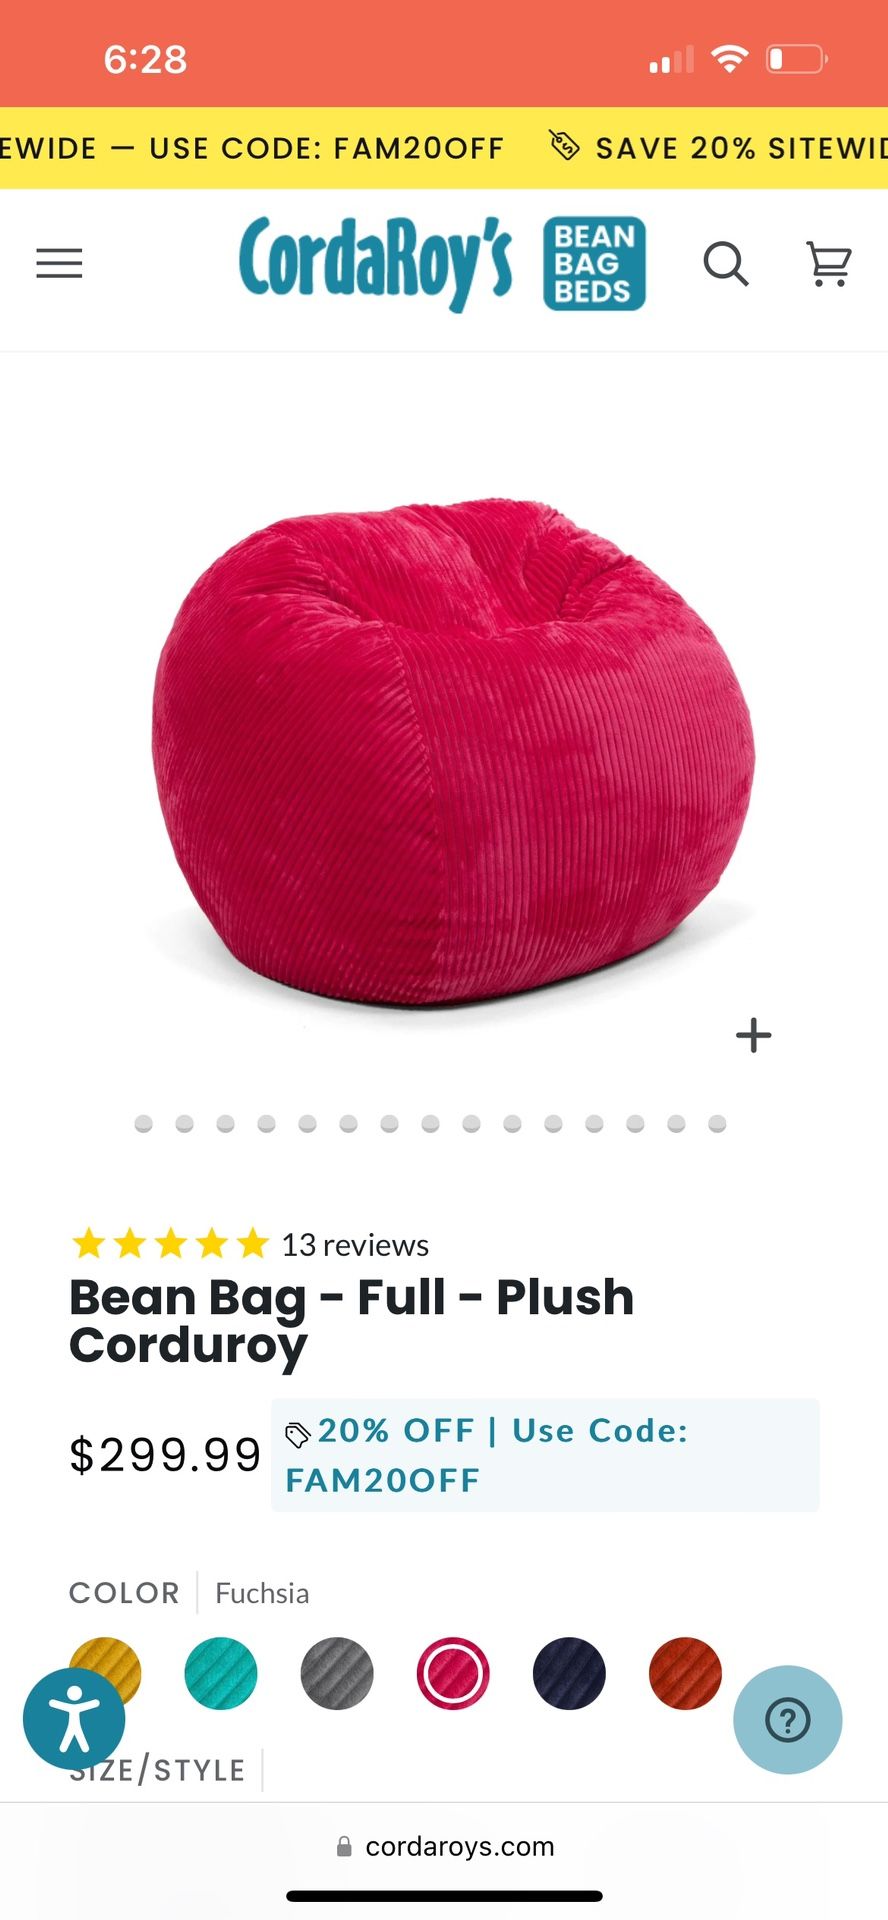 Bean Bag CordaRoy’s Full Size Used ONLY ONCE